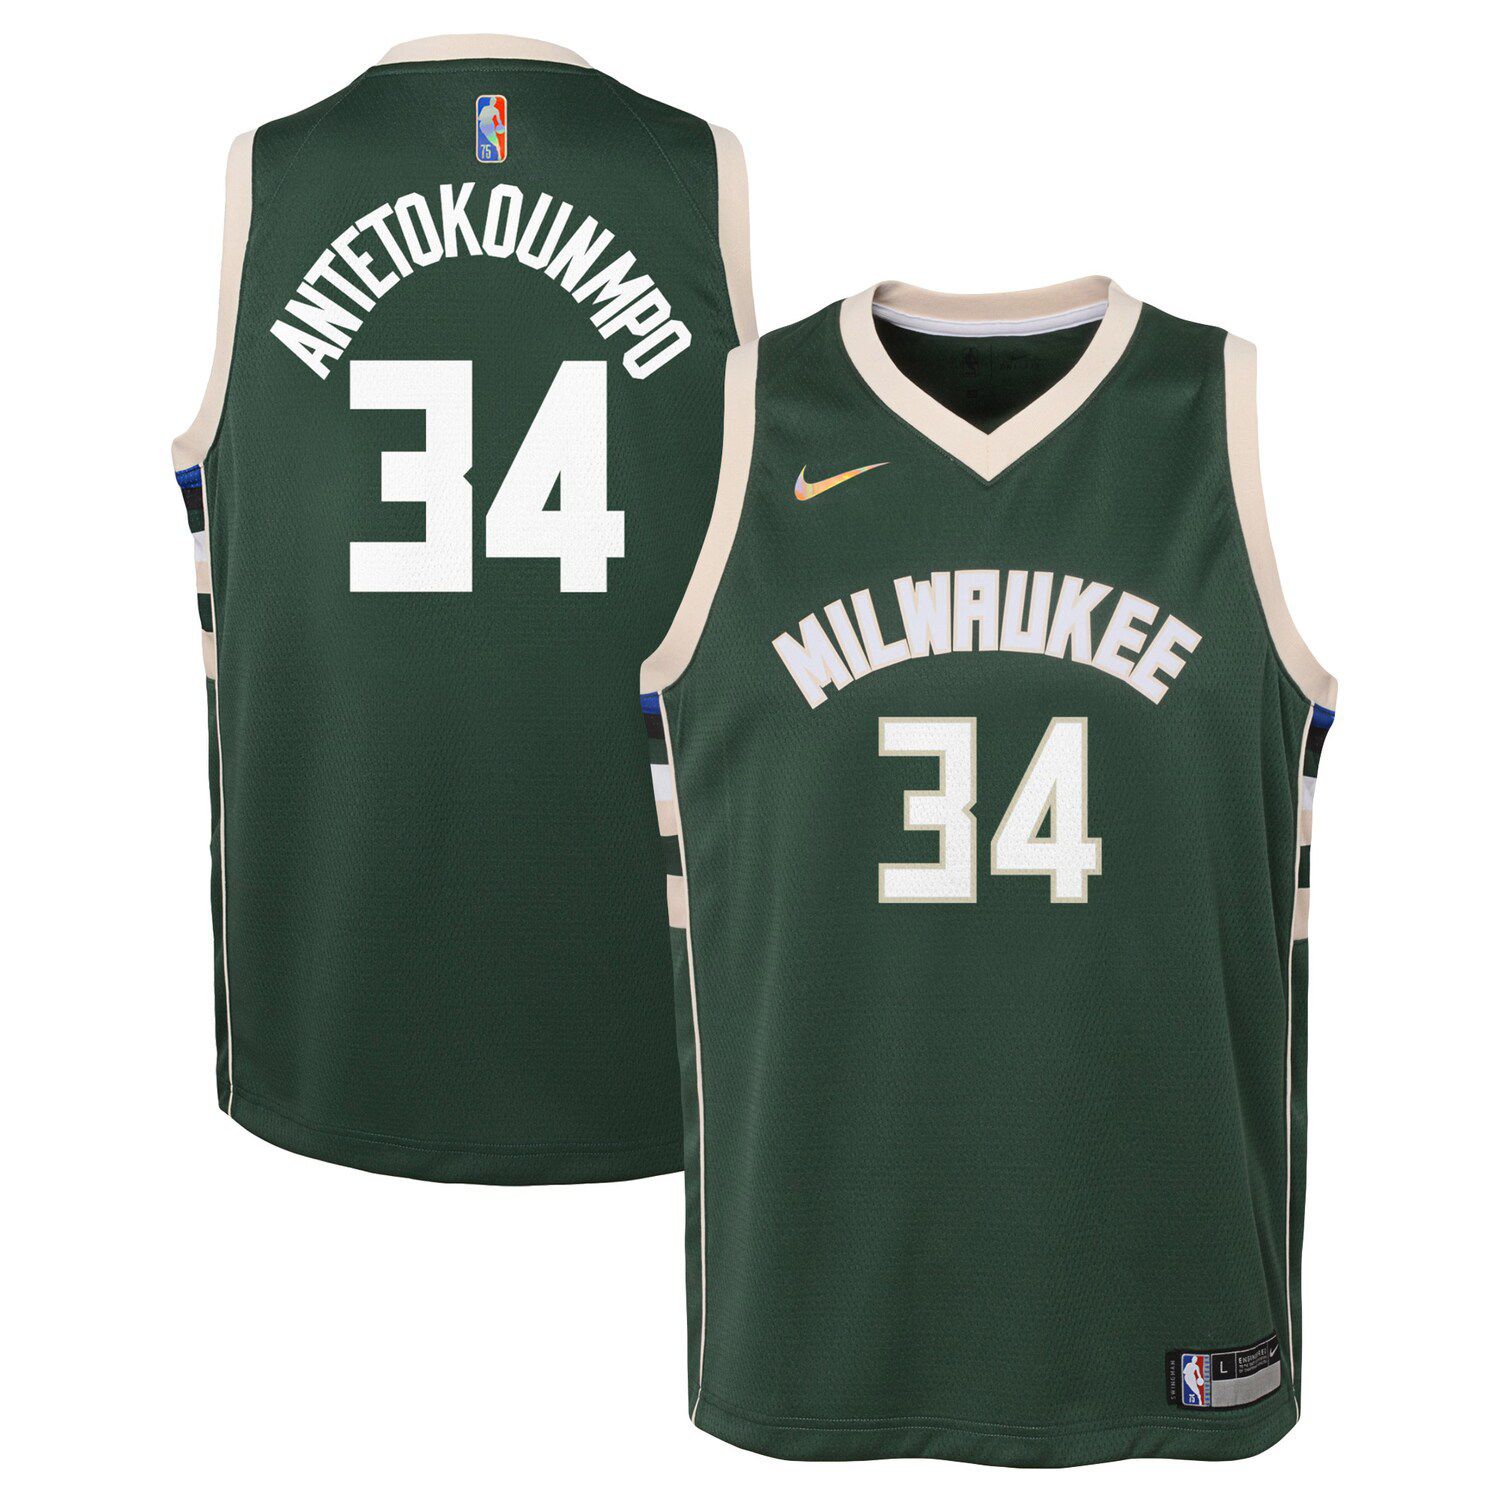 giannis jersey for kids